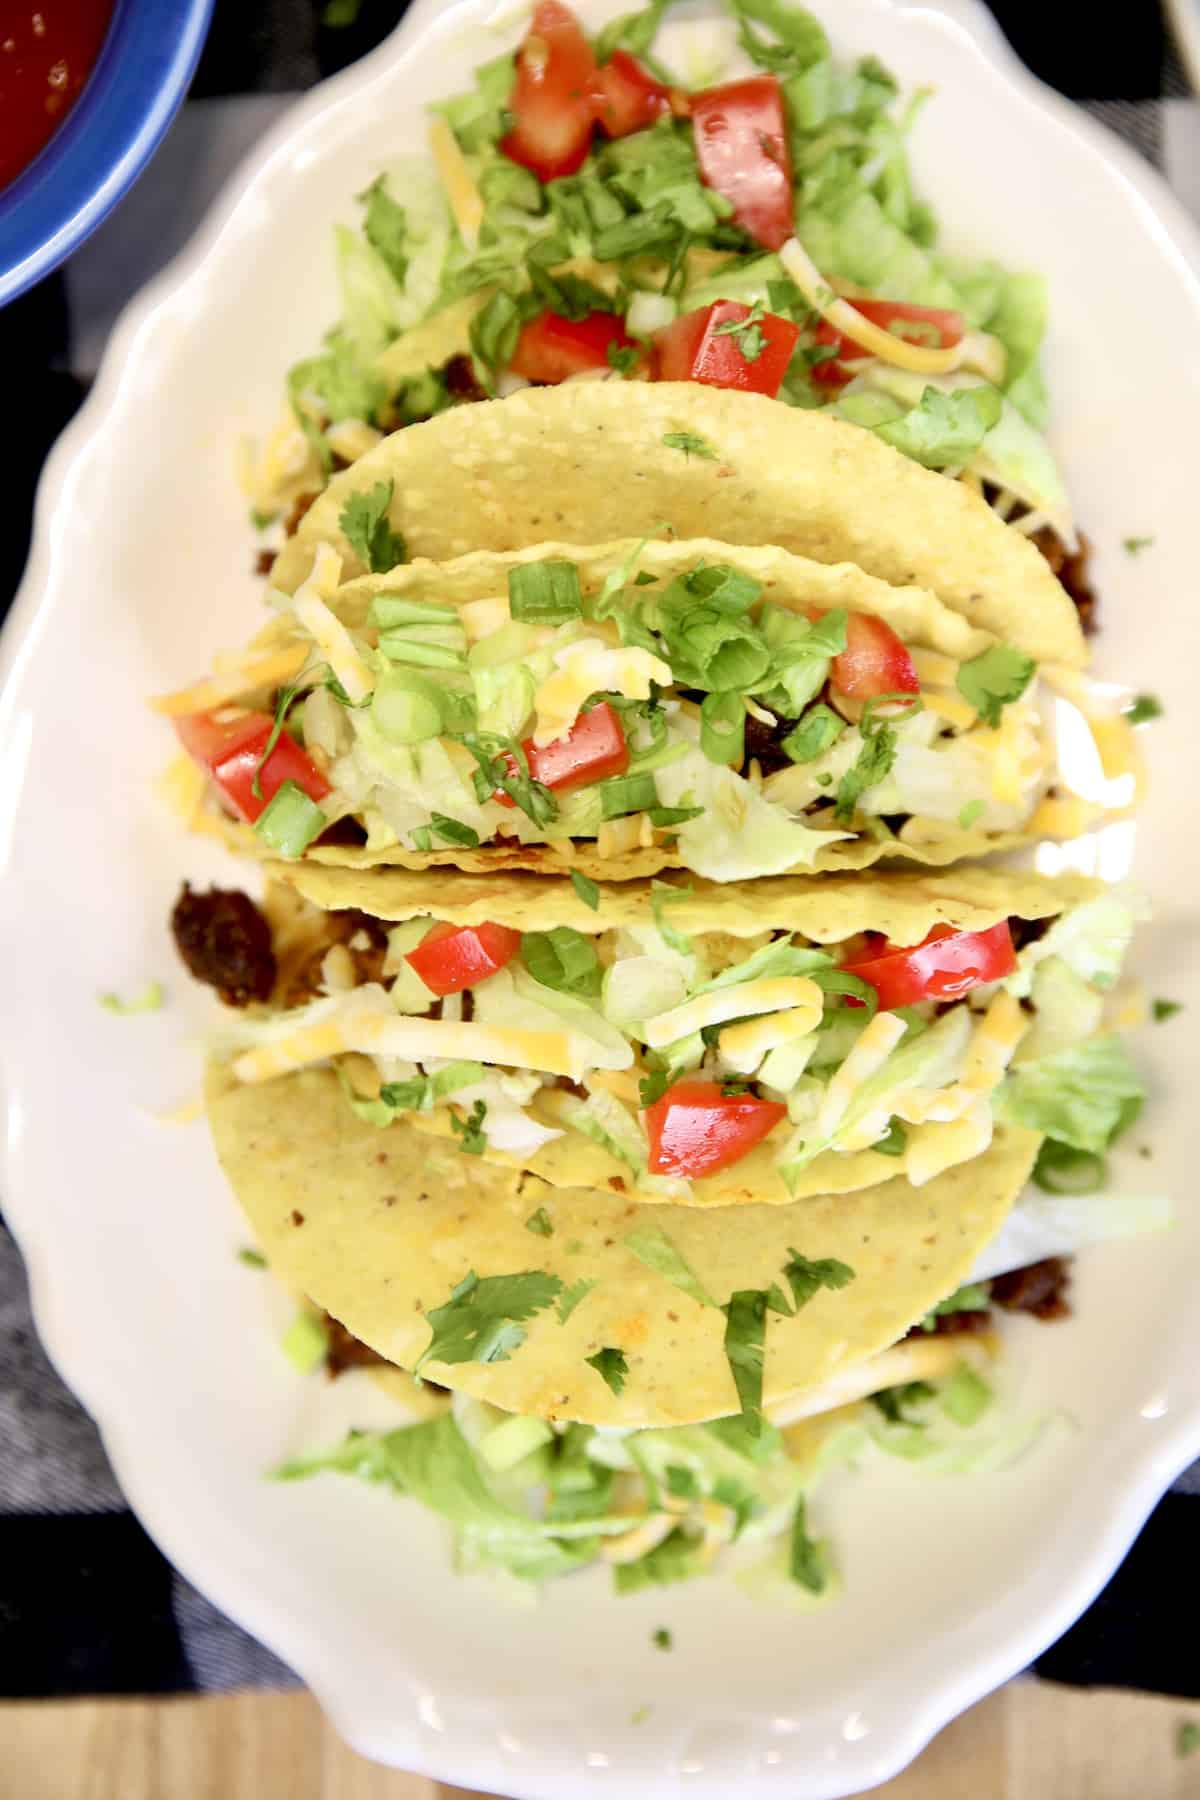 Platter of ground beef tacos with lettuce, tomatoes.